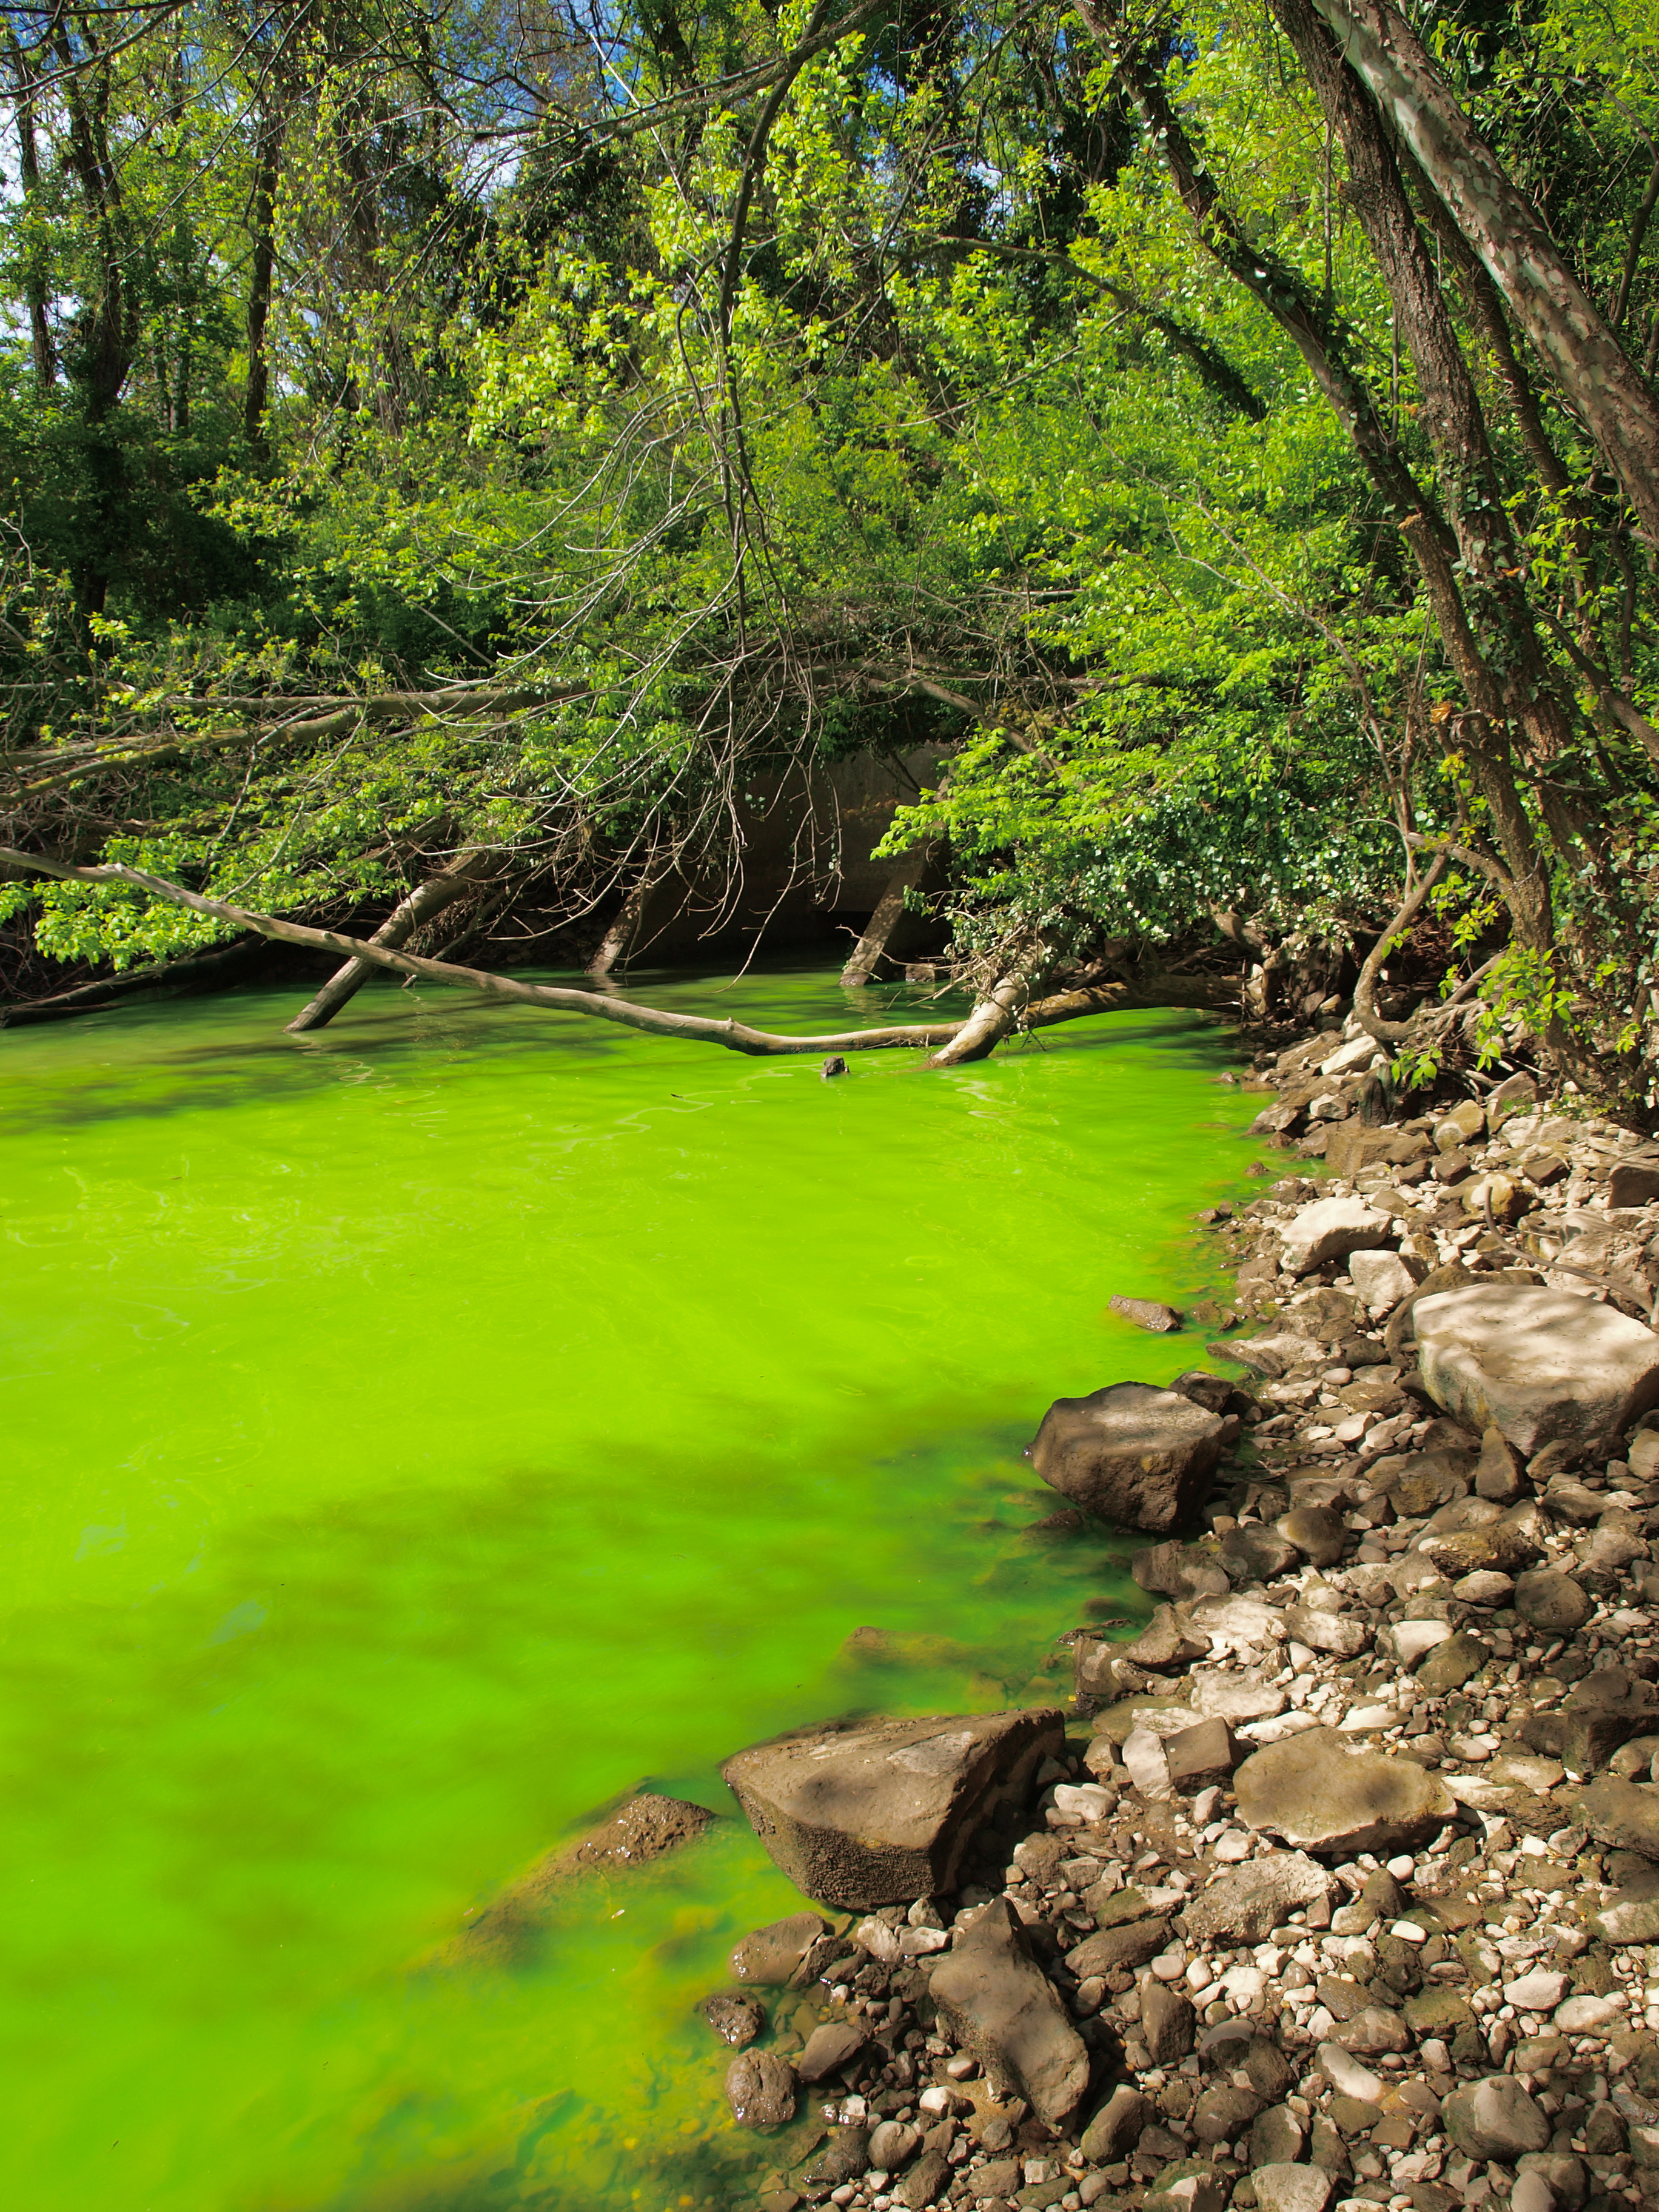 Too much of a good thing?  Exploring nutrient pollution in streams using bioindicators